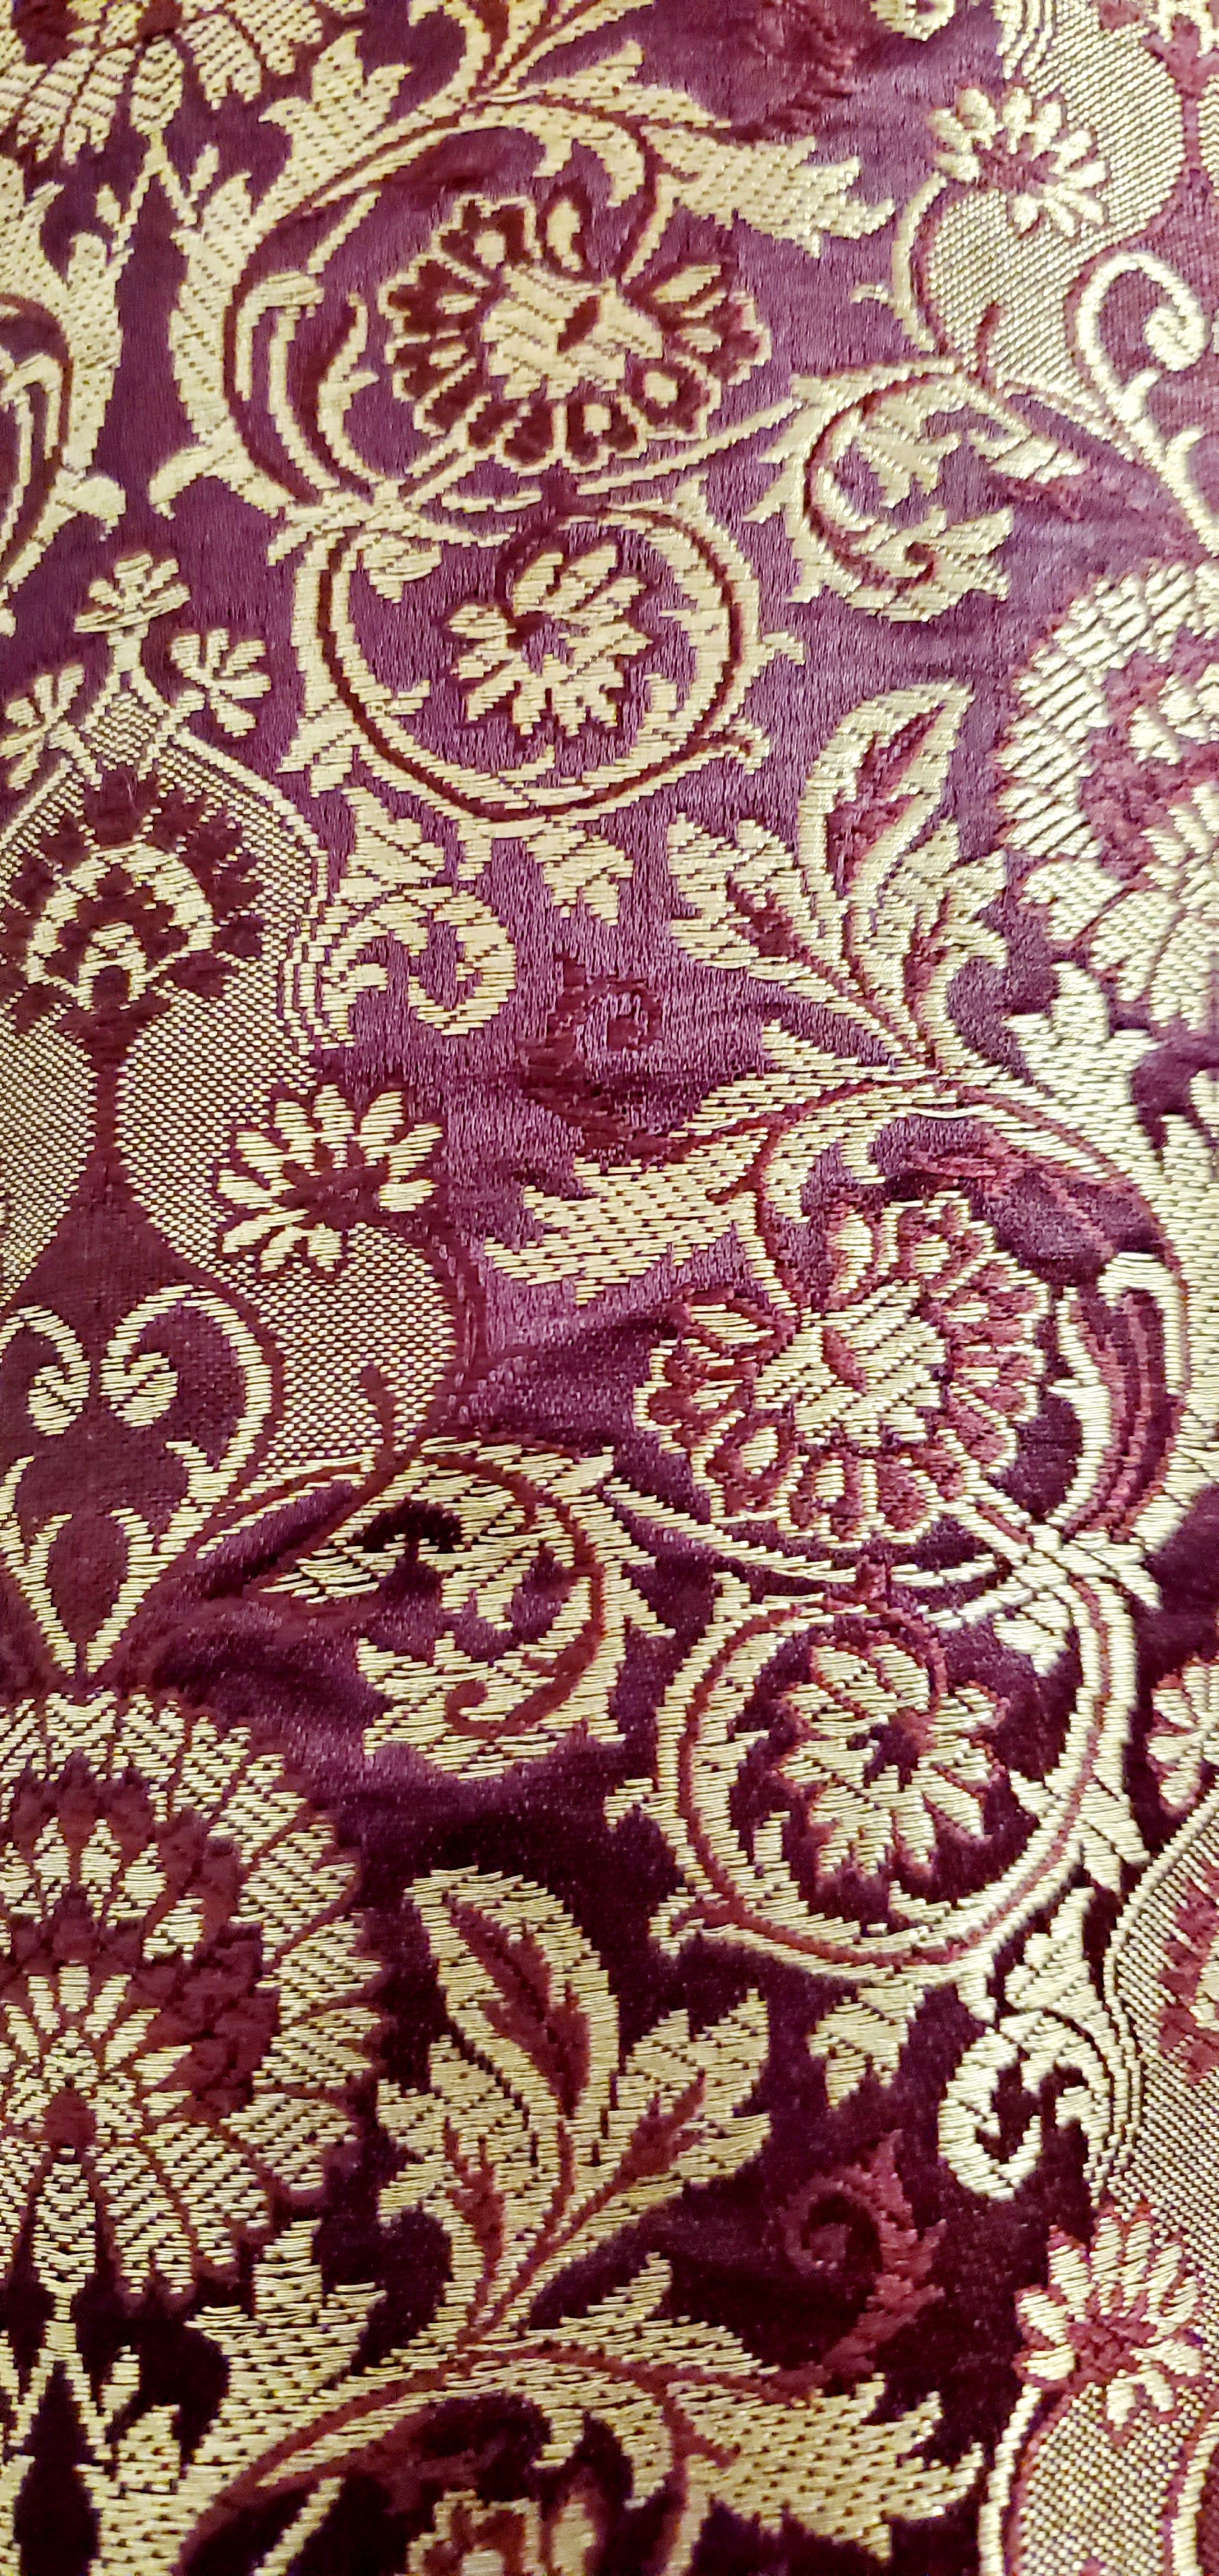 close up fabric view of Burgundy corduroy bomber jacket with metallic gold sleeve and knot closures